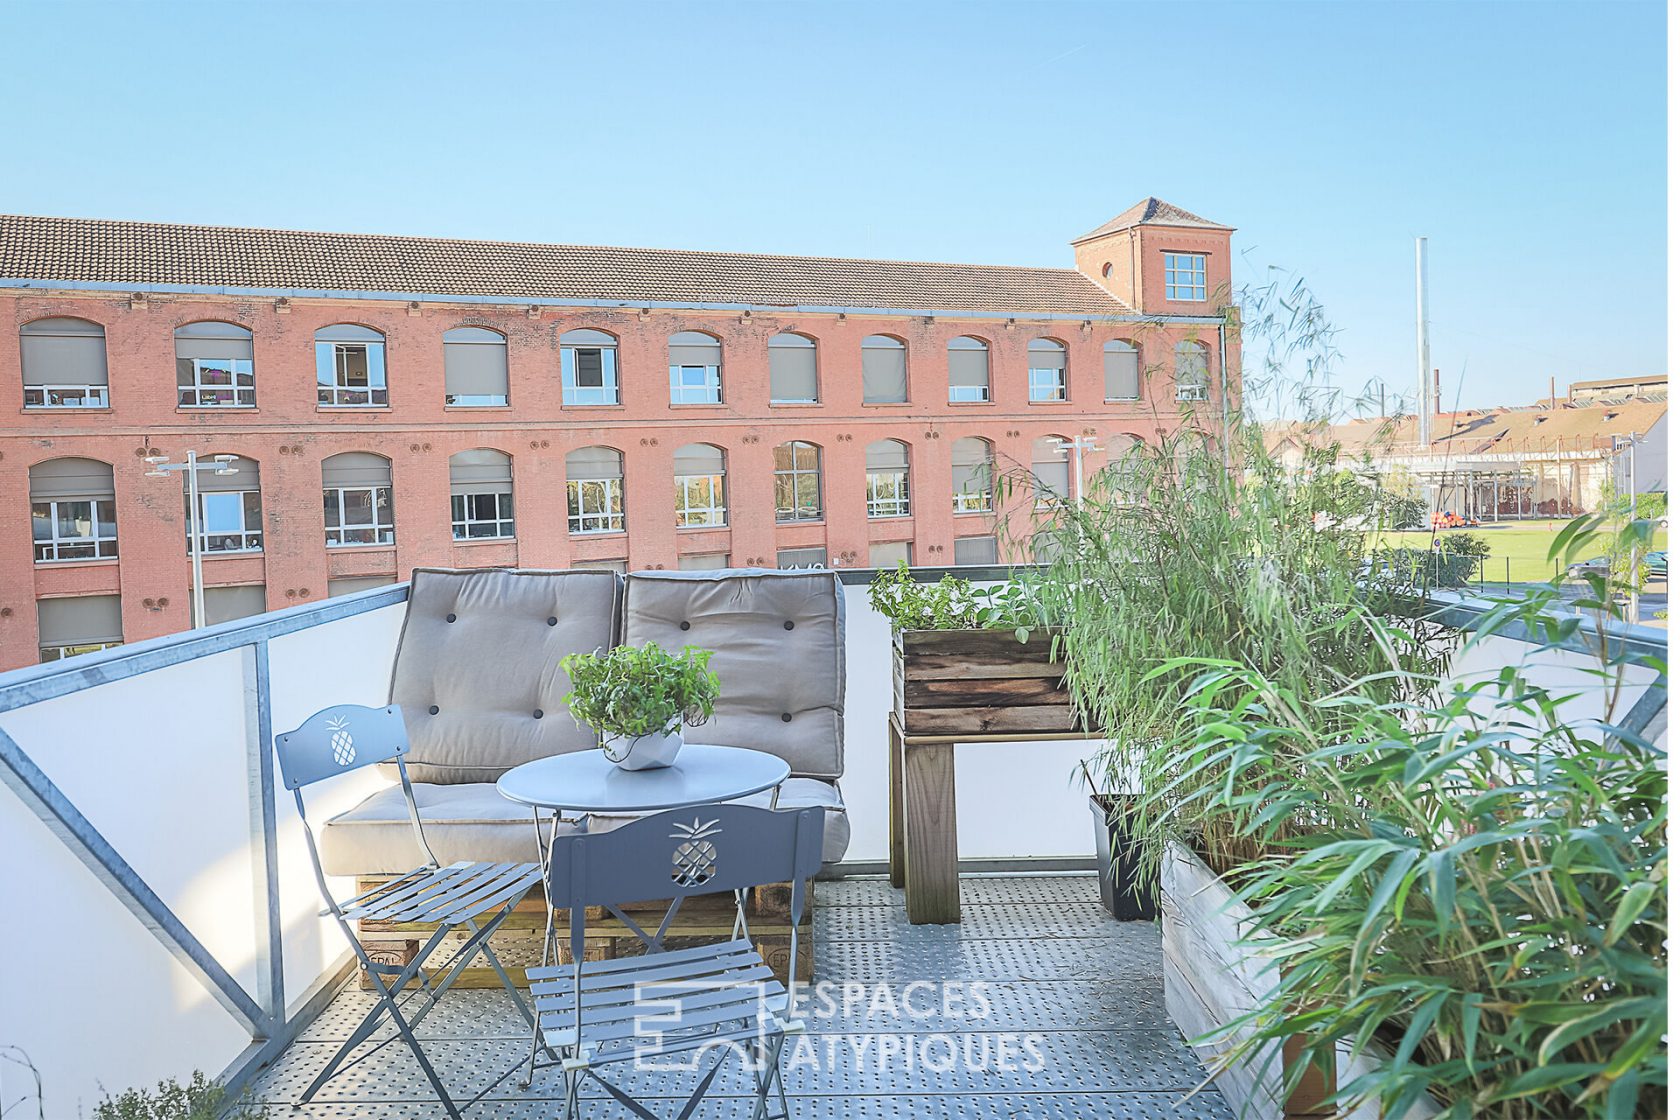 Industrial loft and its terrace in the foundry district